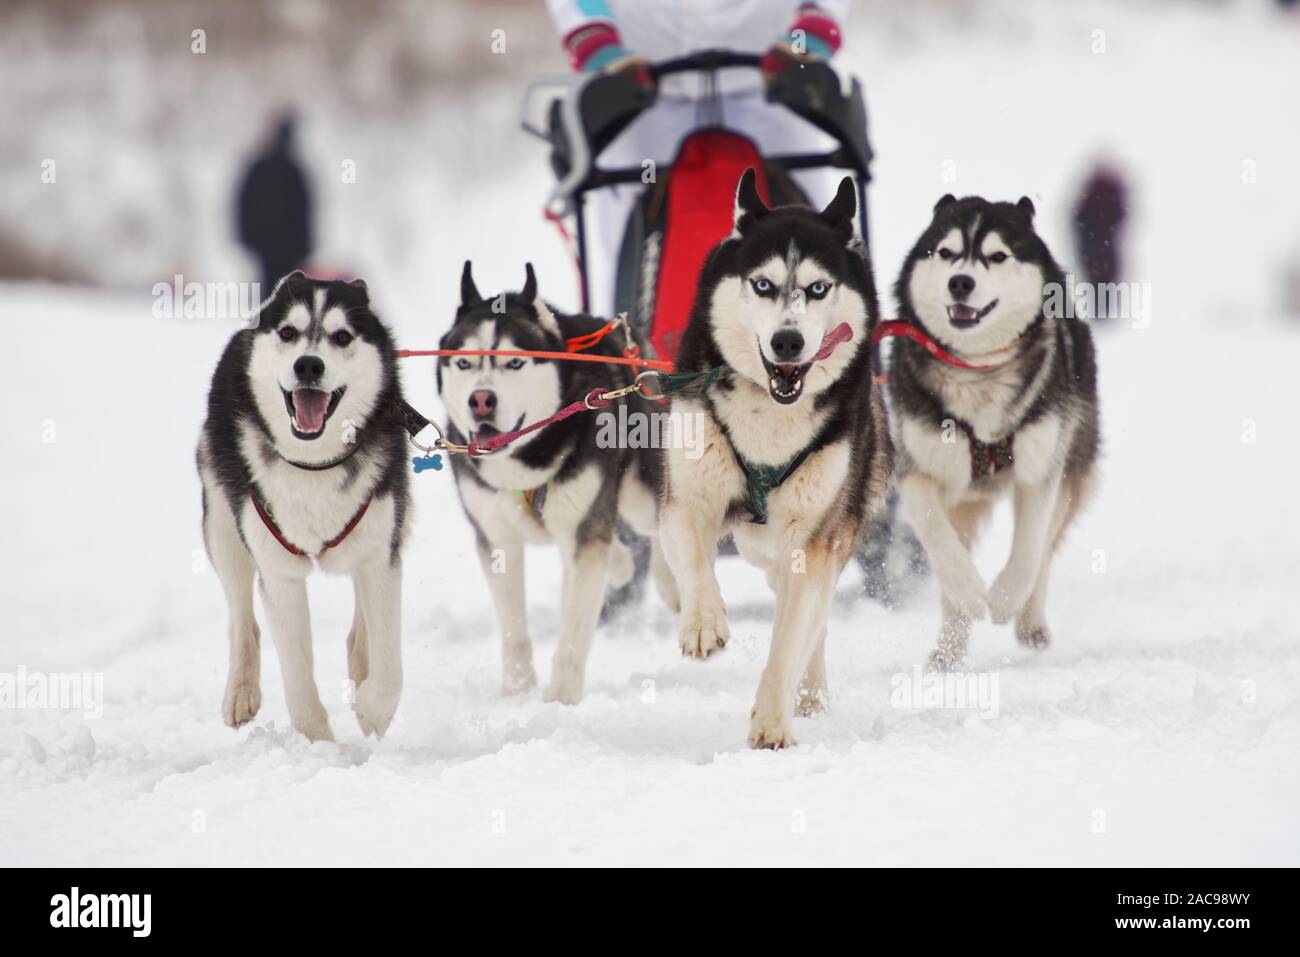 Musher and his sled dog team compete in Grand tour Kulikovo Pole sled dog race.This annual race gathers competitors from all the Russia Stock Photo